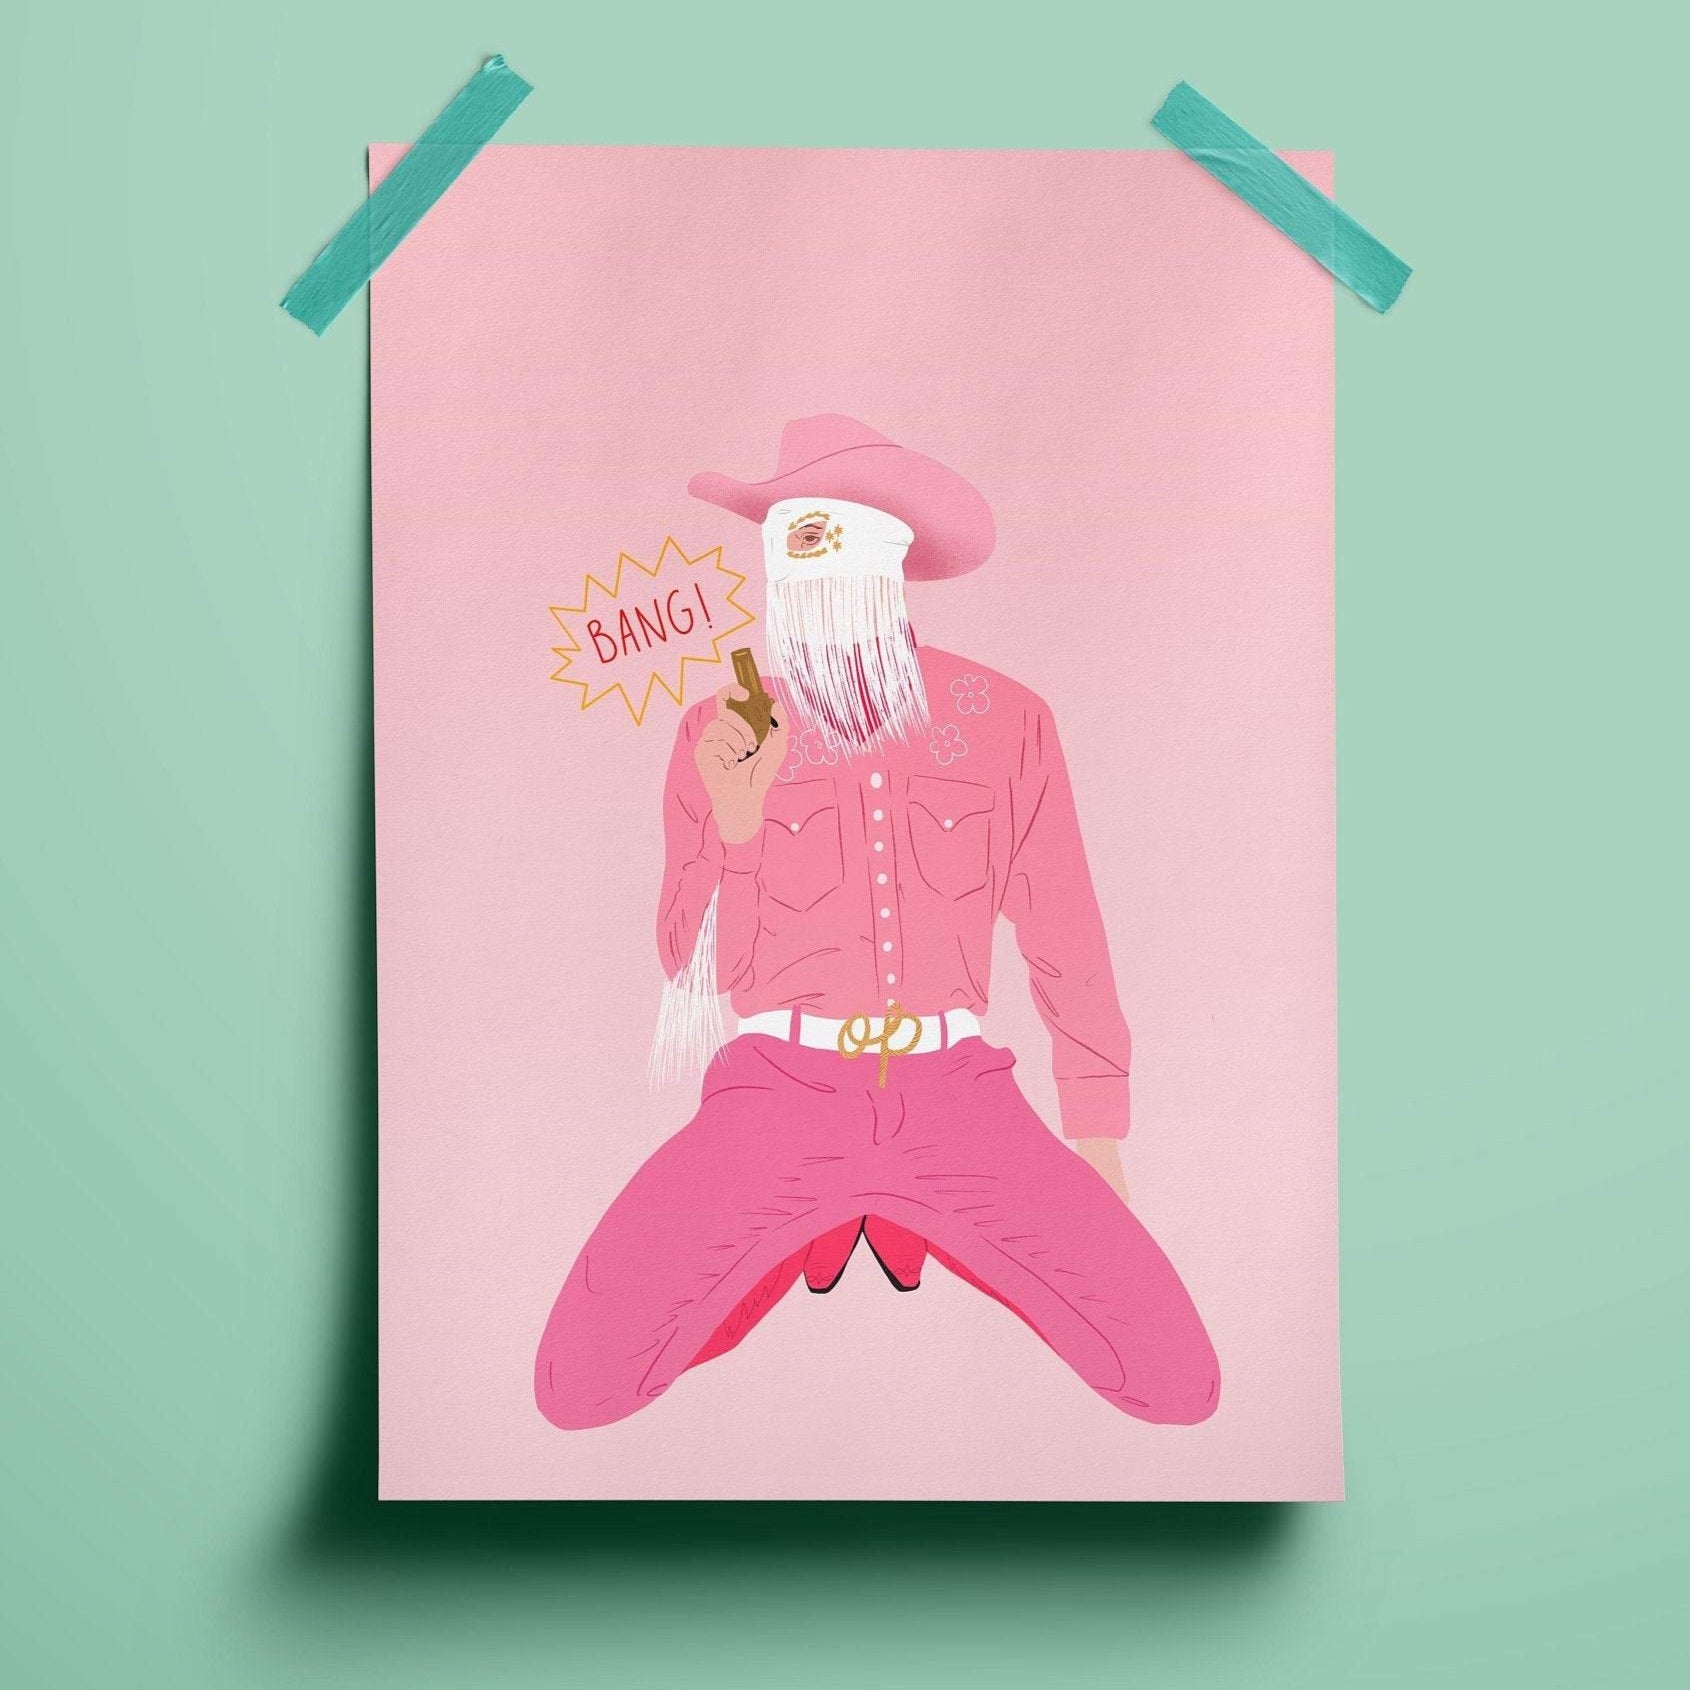 illustration print of a kneeling orville peck in a pick cowboy outfit holding a golden gun. the background is a lighter coloured pink.